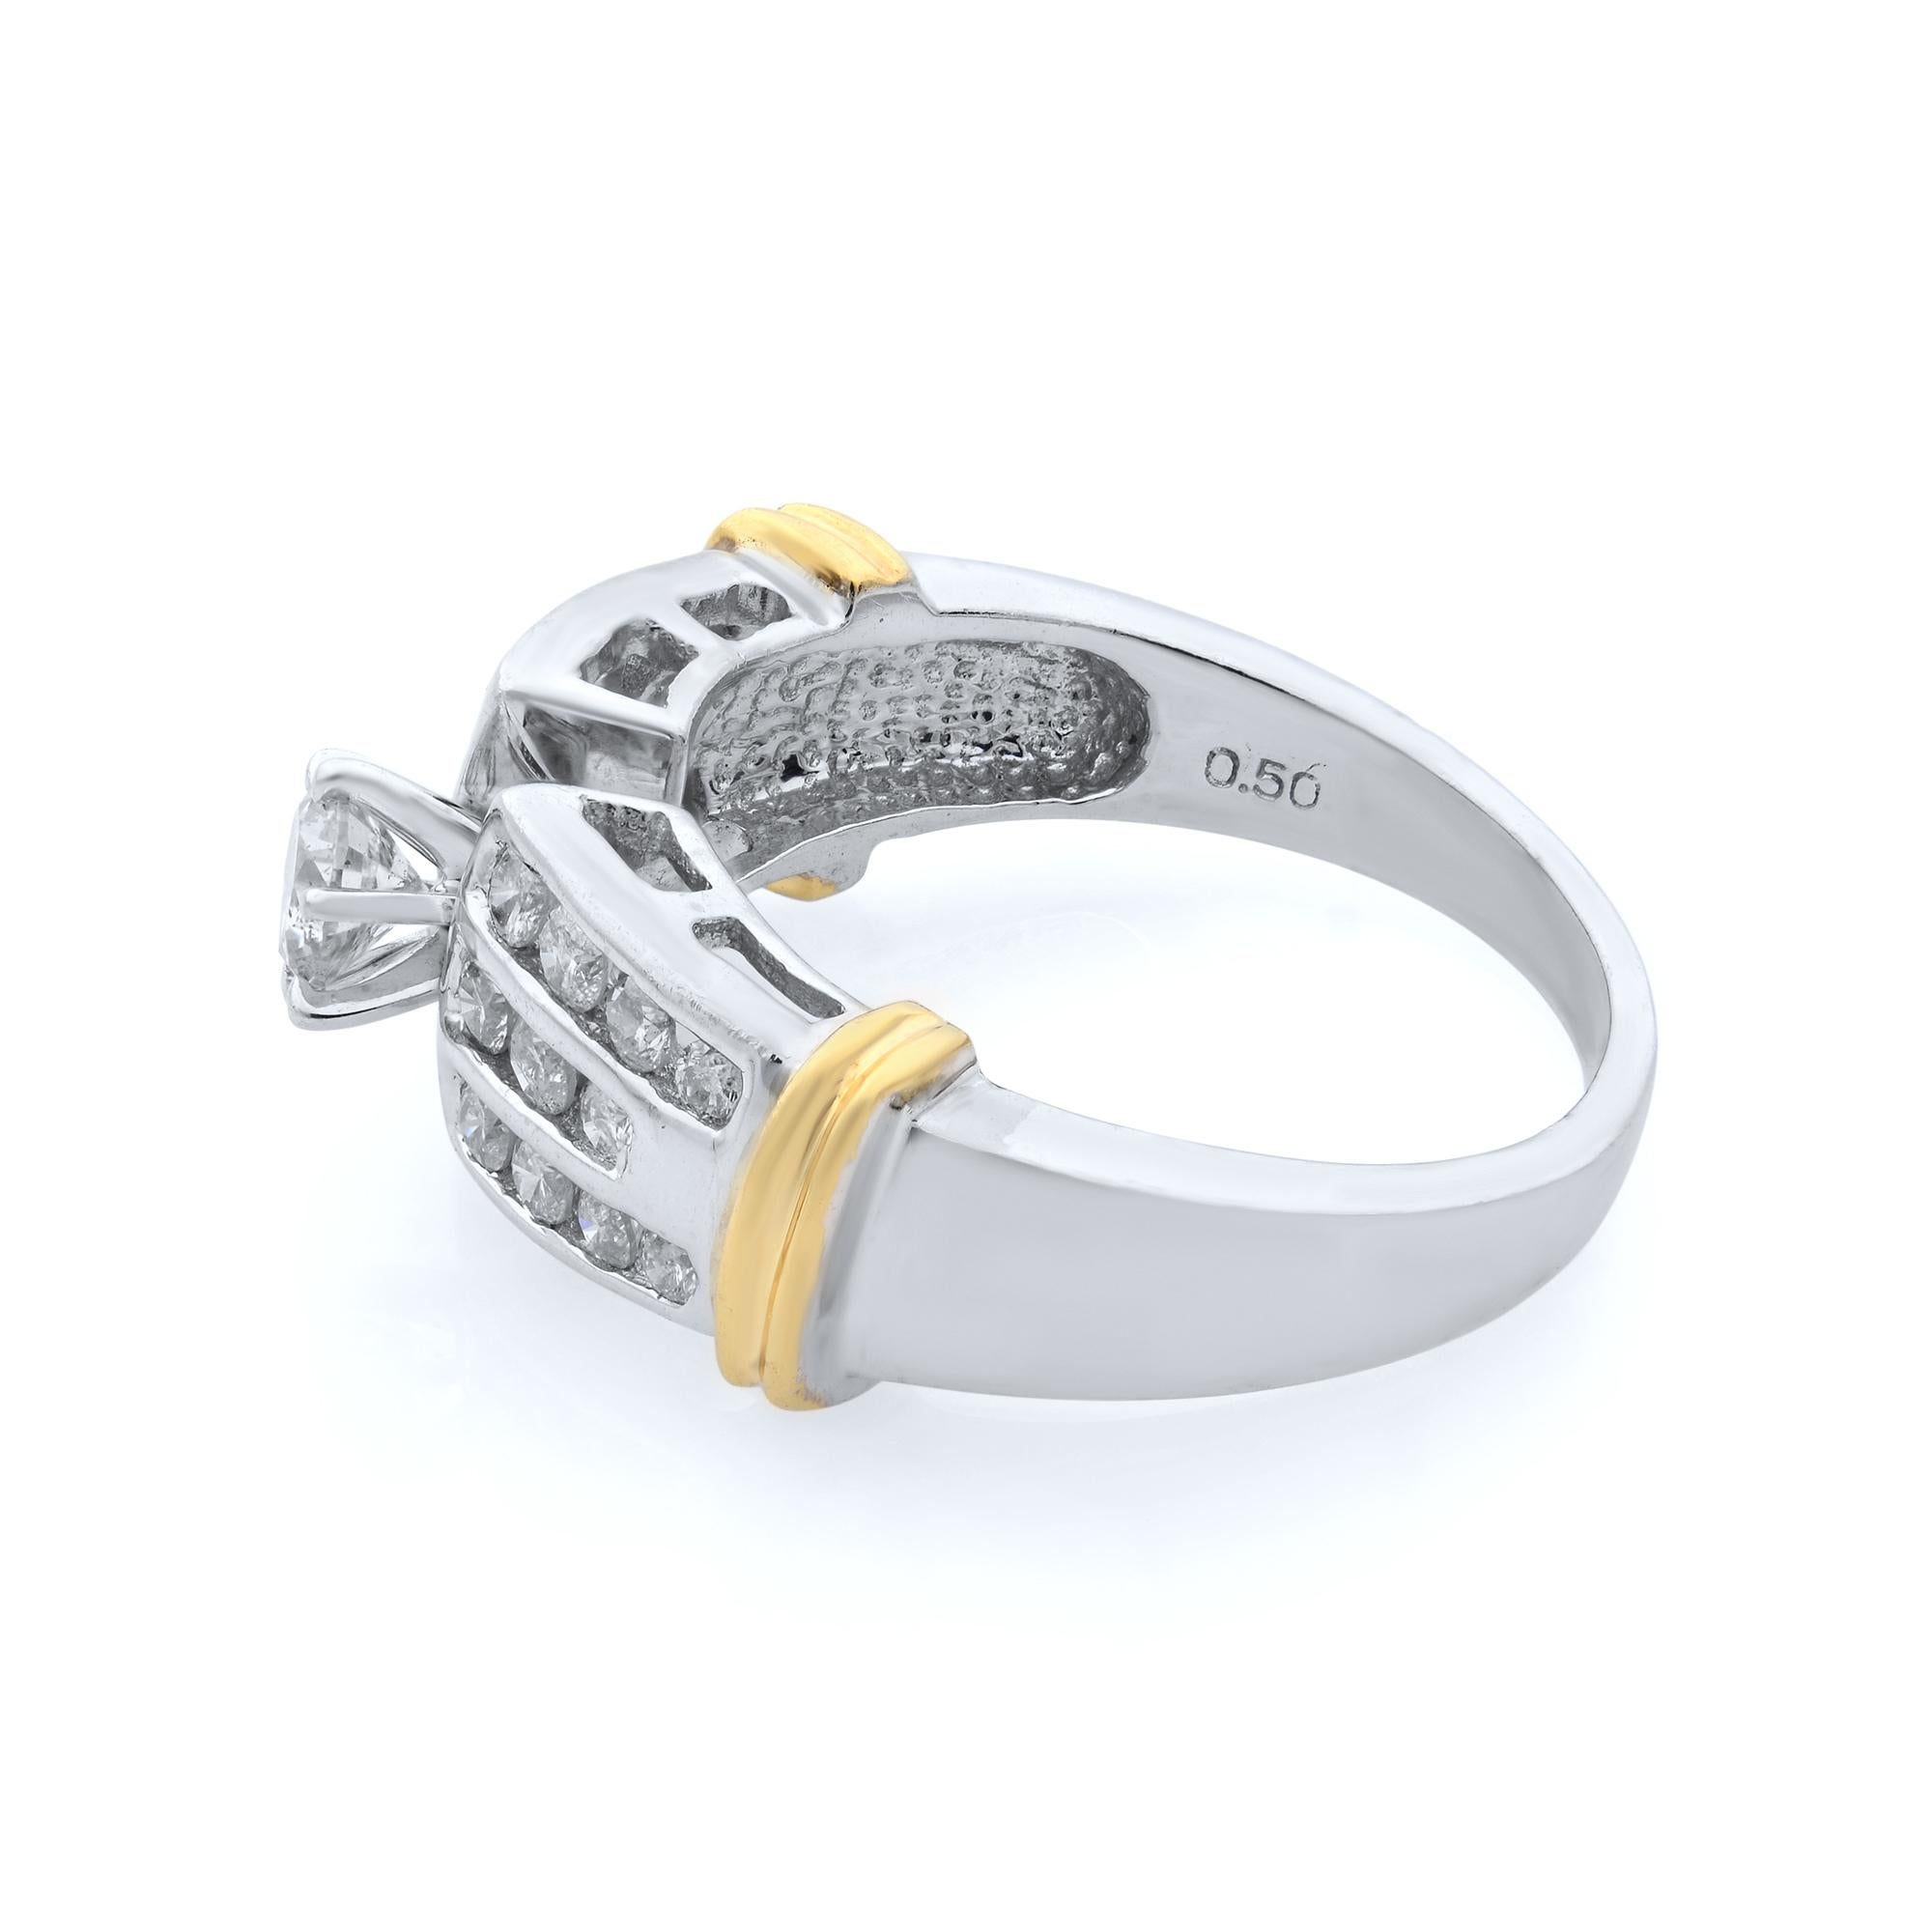 Rachel Koen Diamond Ladies Ring 14K White and Yellow Gold 0.75cttw In New Condition For Sale In New York, NY